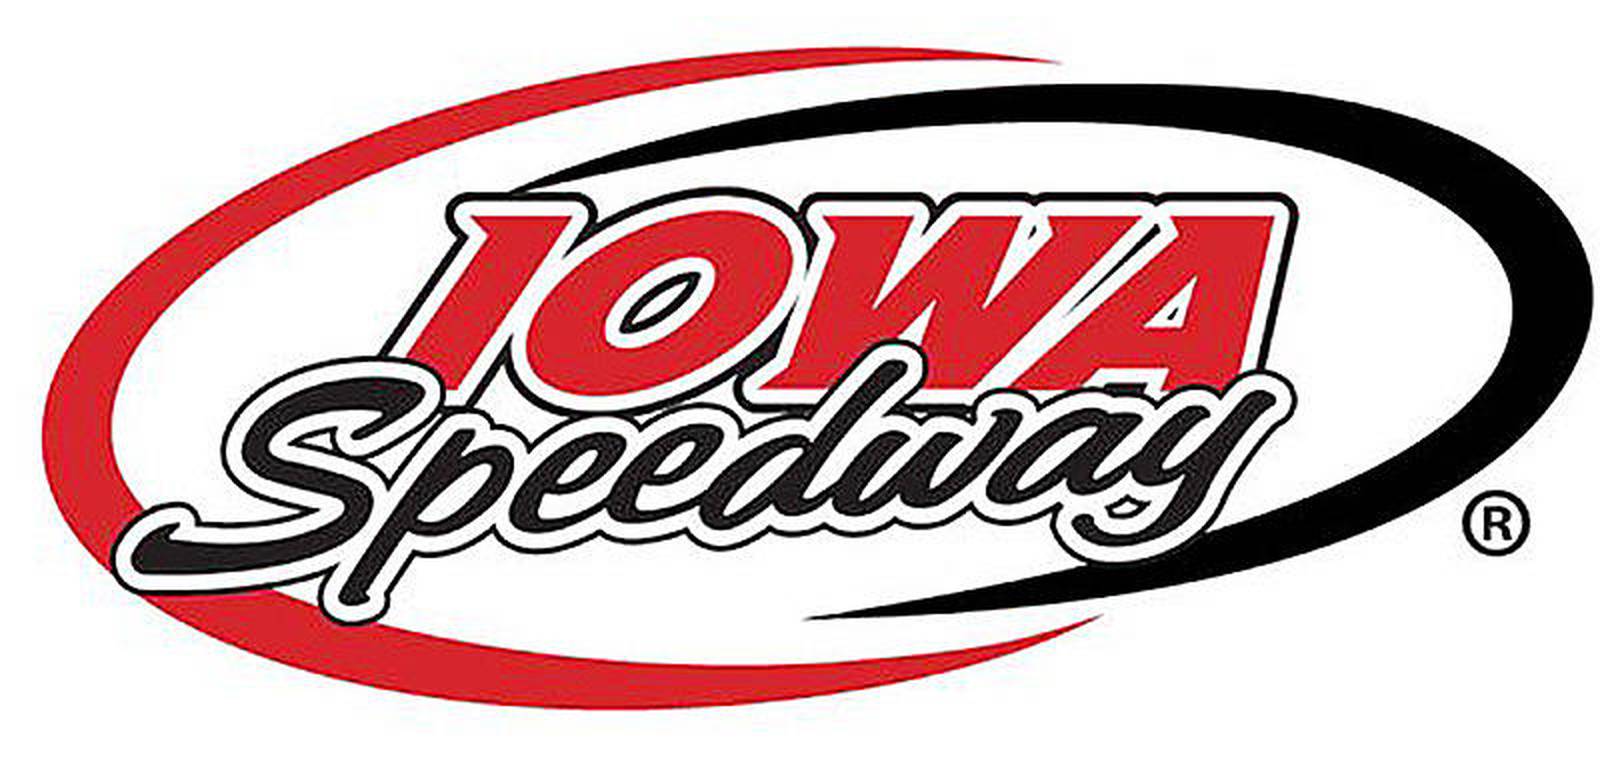 Iowa Speedway has no imminent plans to close Newton Daily News